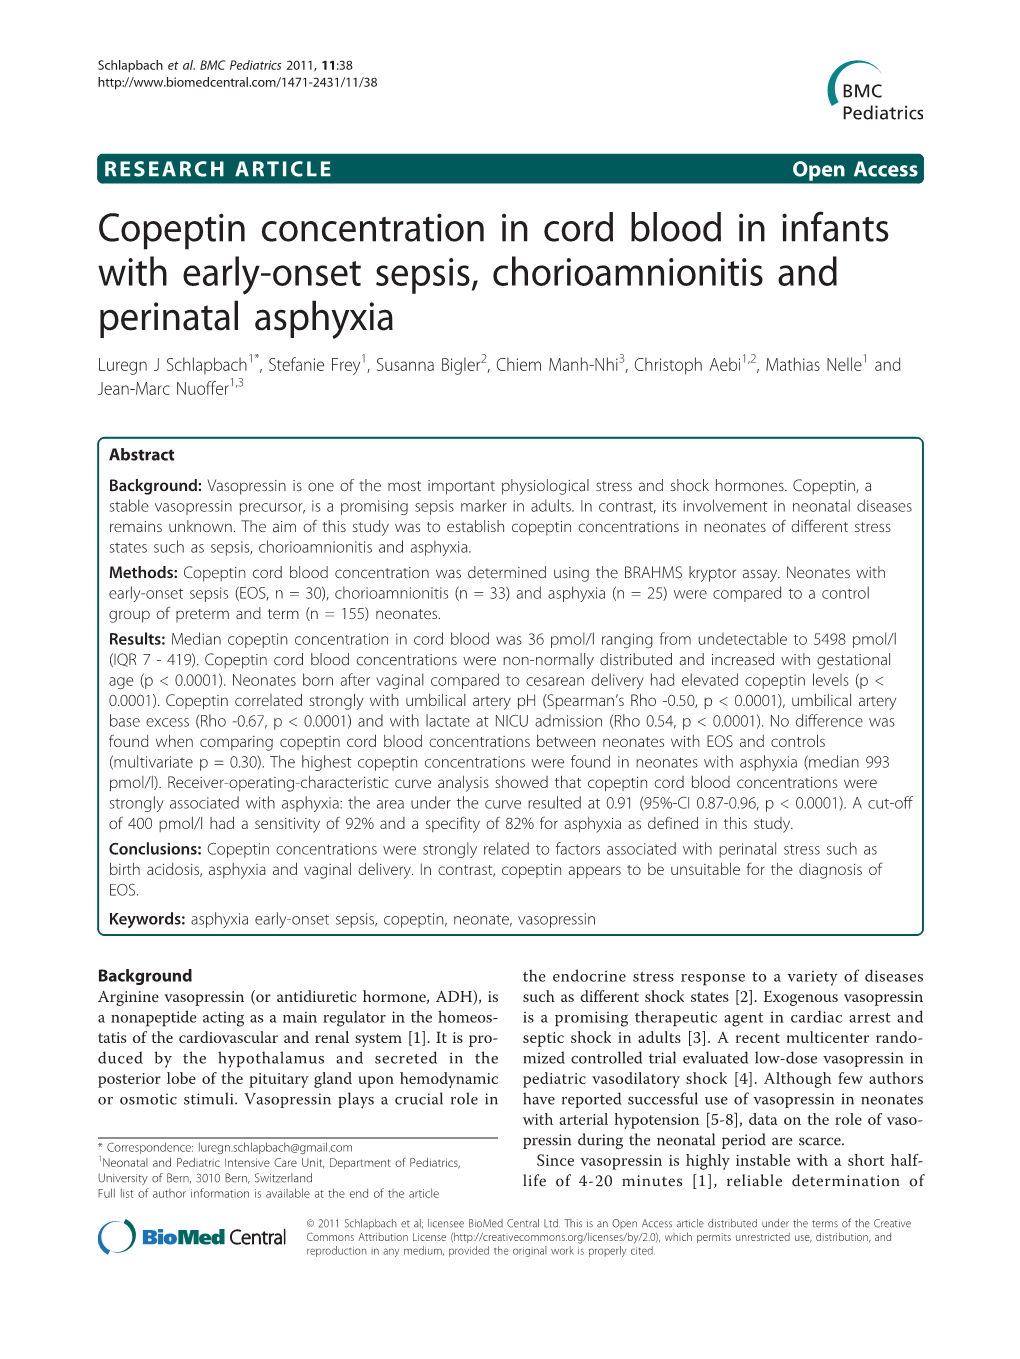 Copeptin Concentration in Cord Blood in Infants with Early-Onset Sepsis